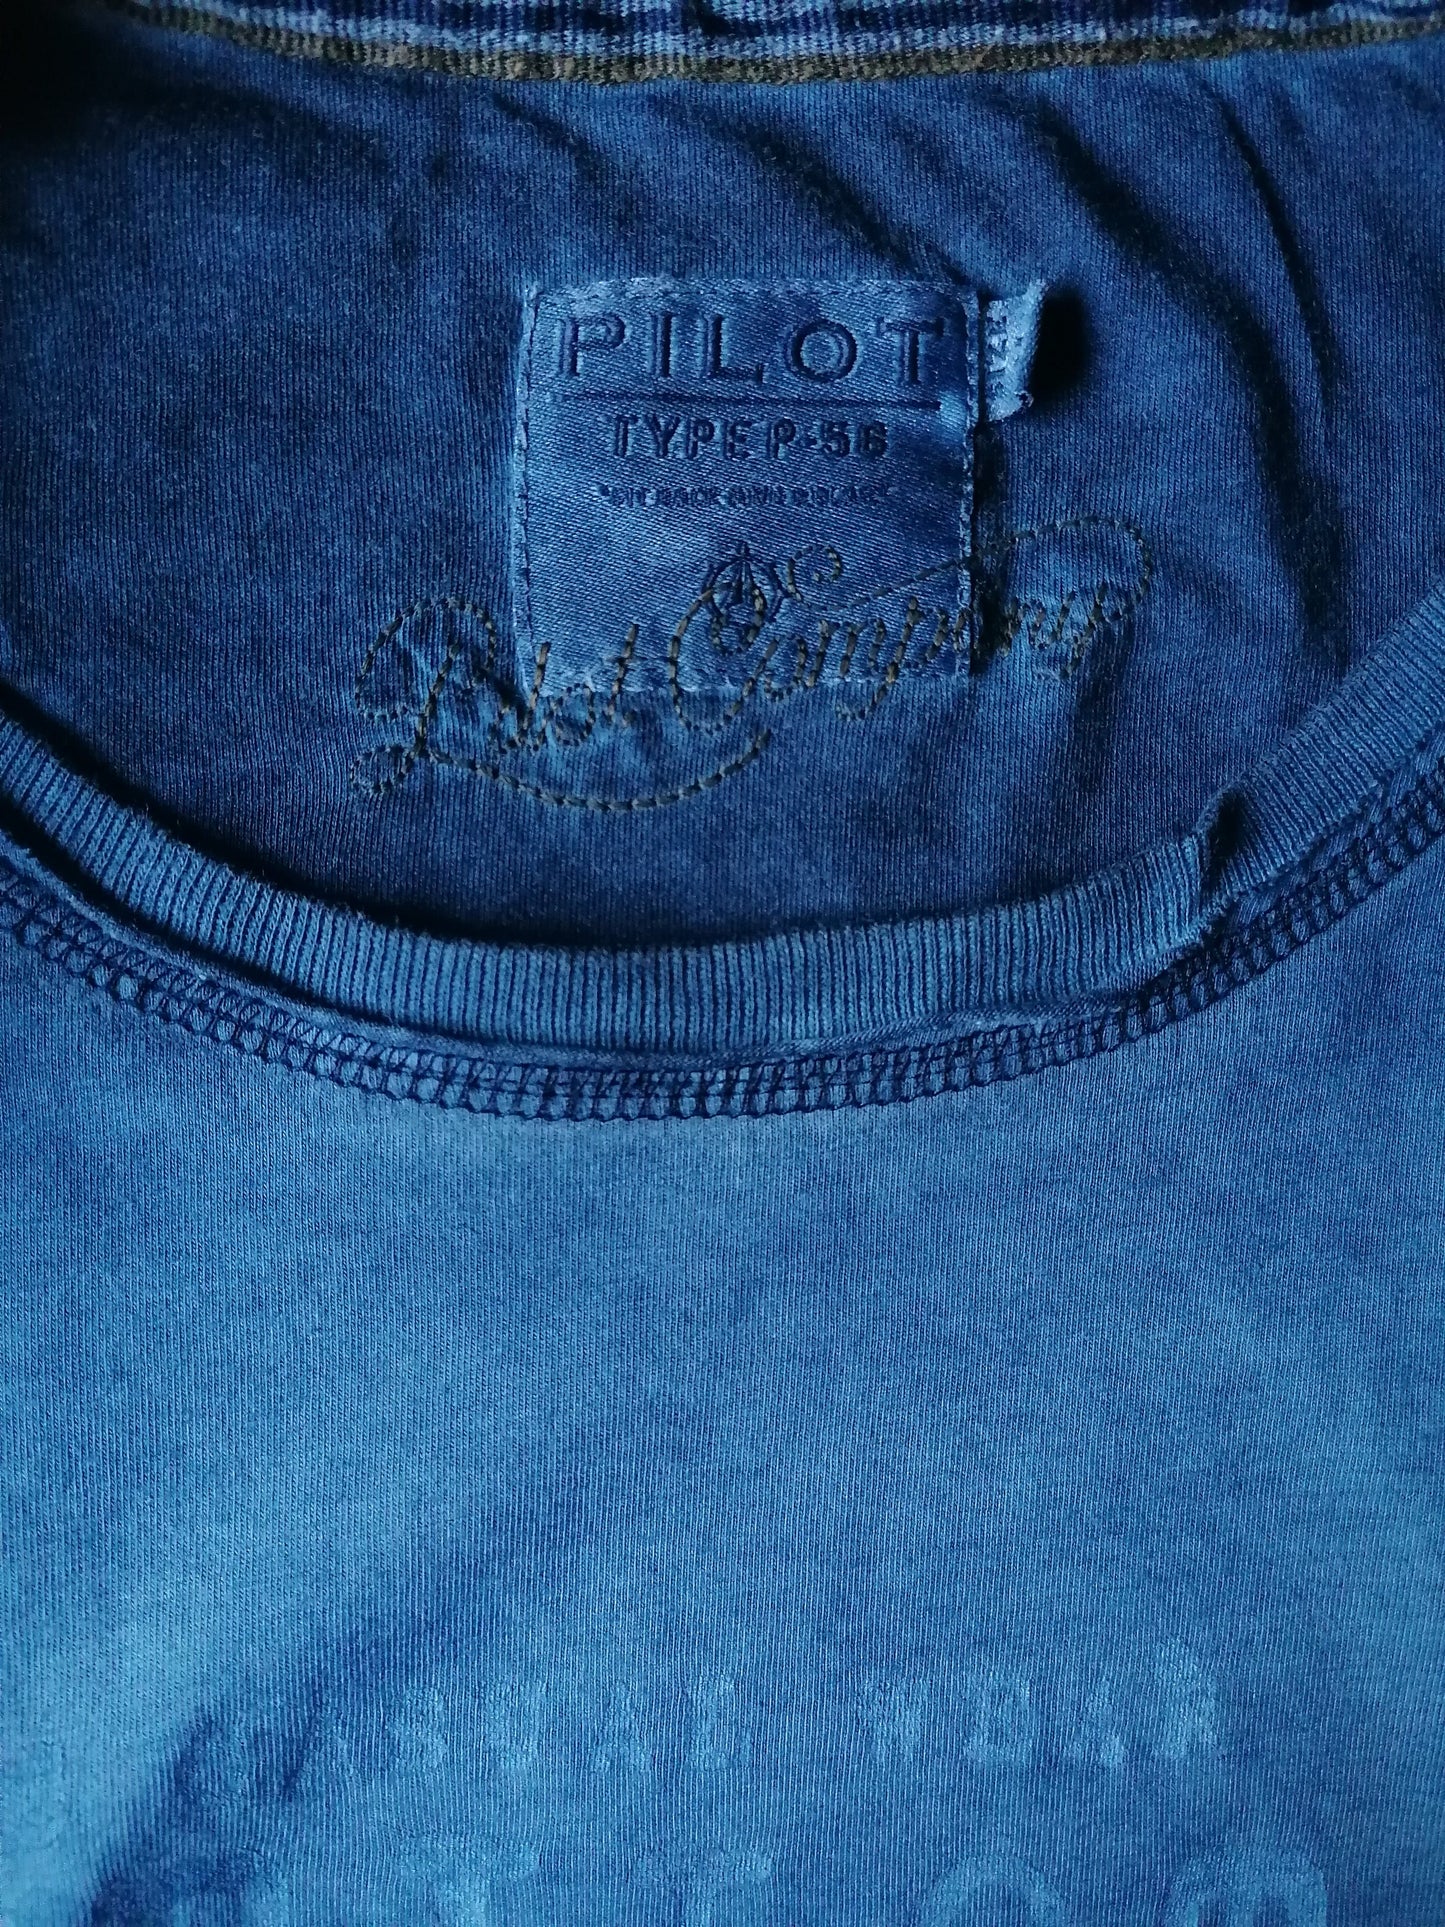 Pilot Longsleeve. Blue mixed with print. Size M.